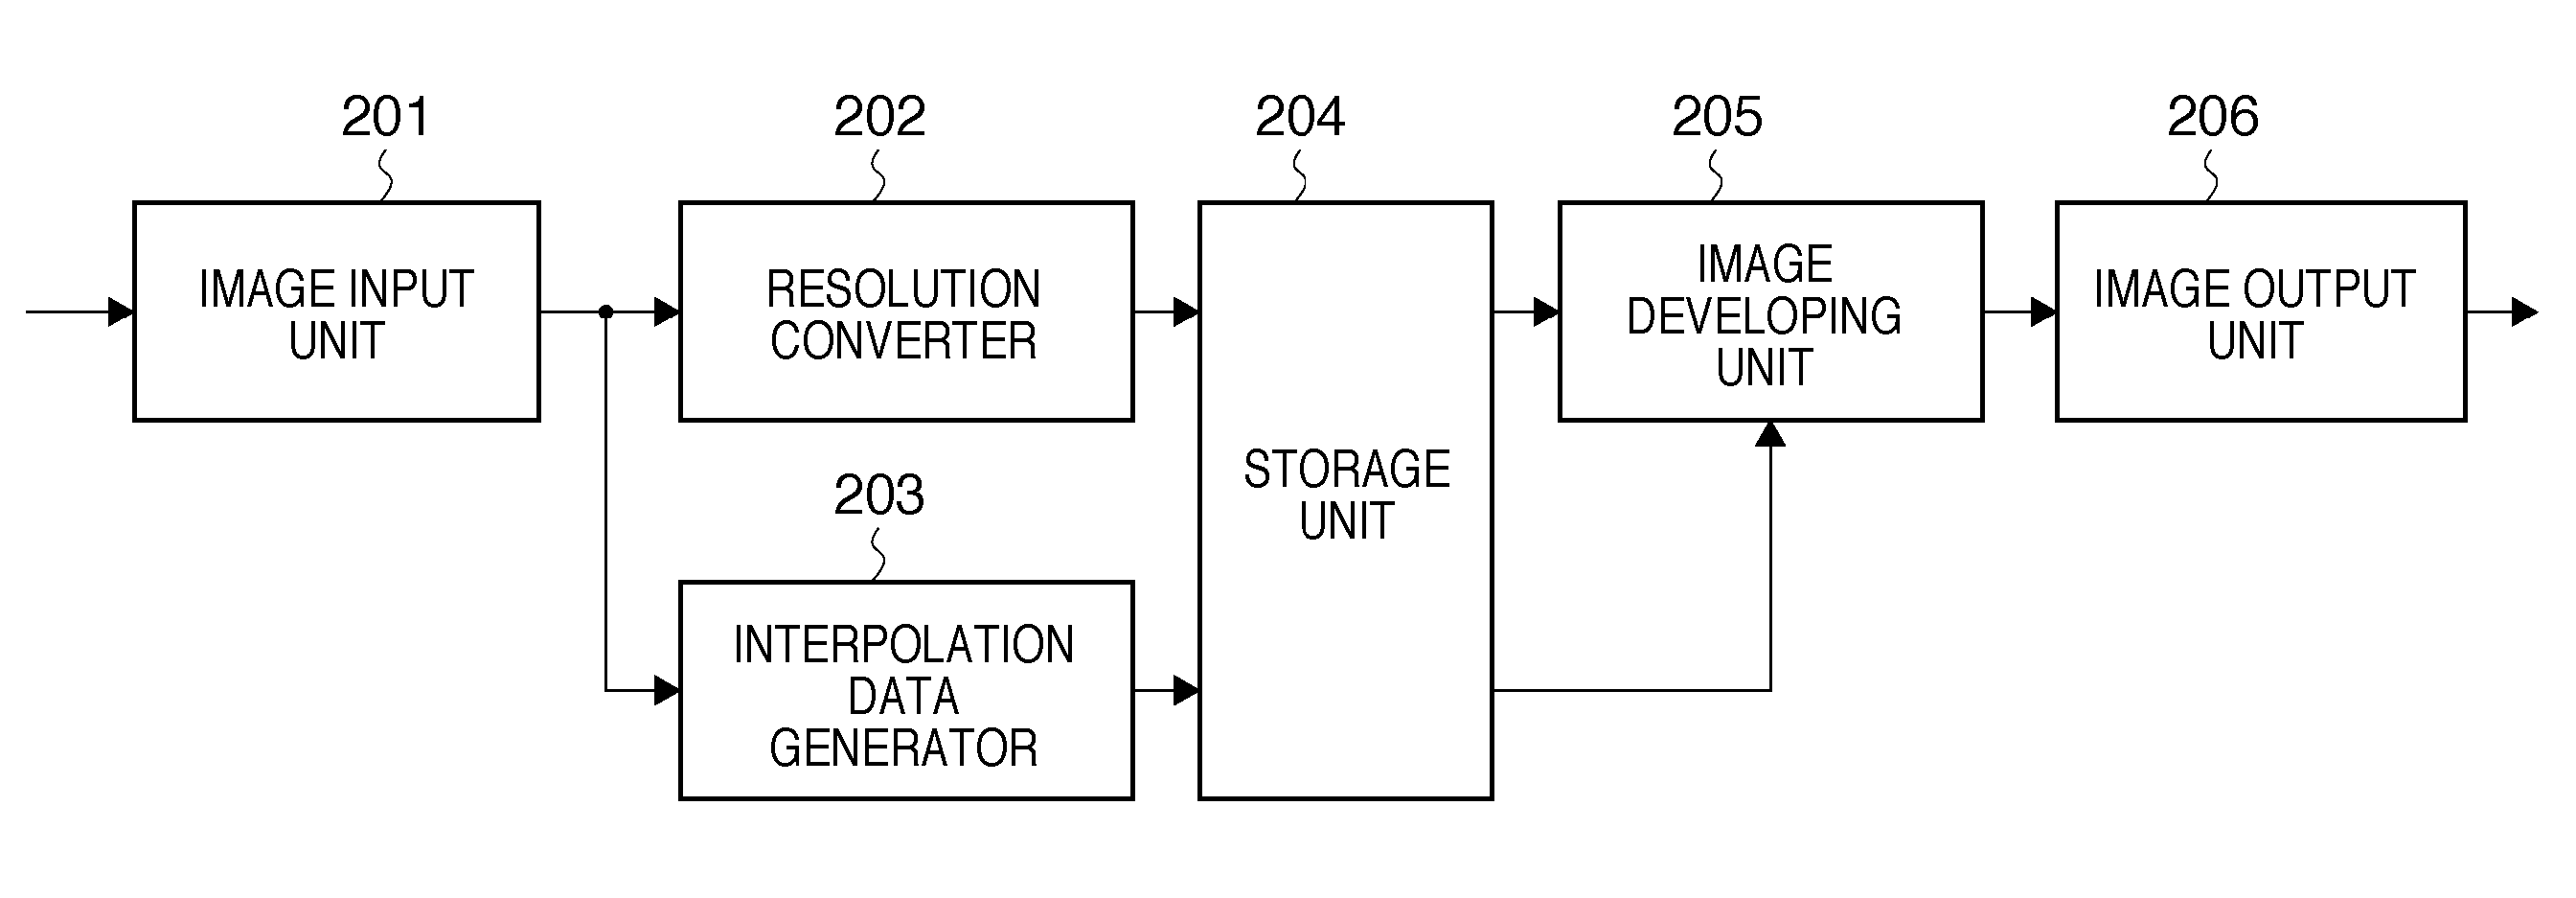 Image encoding apparatus and method of controlling the same